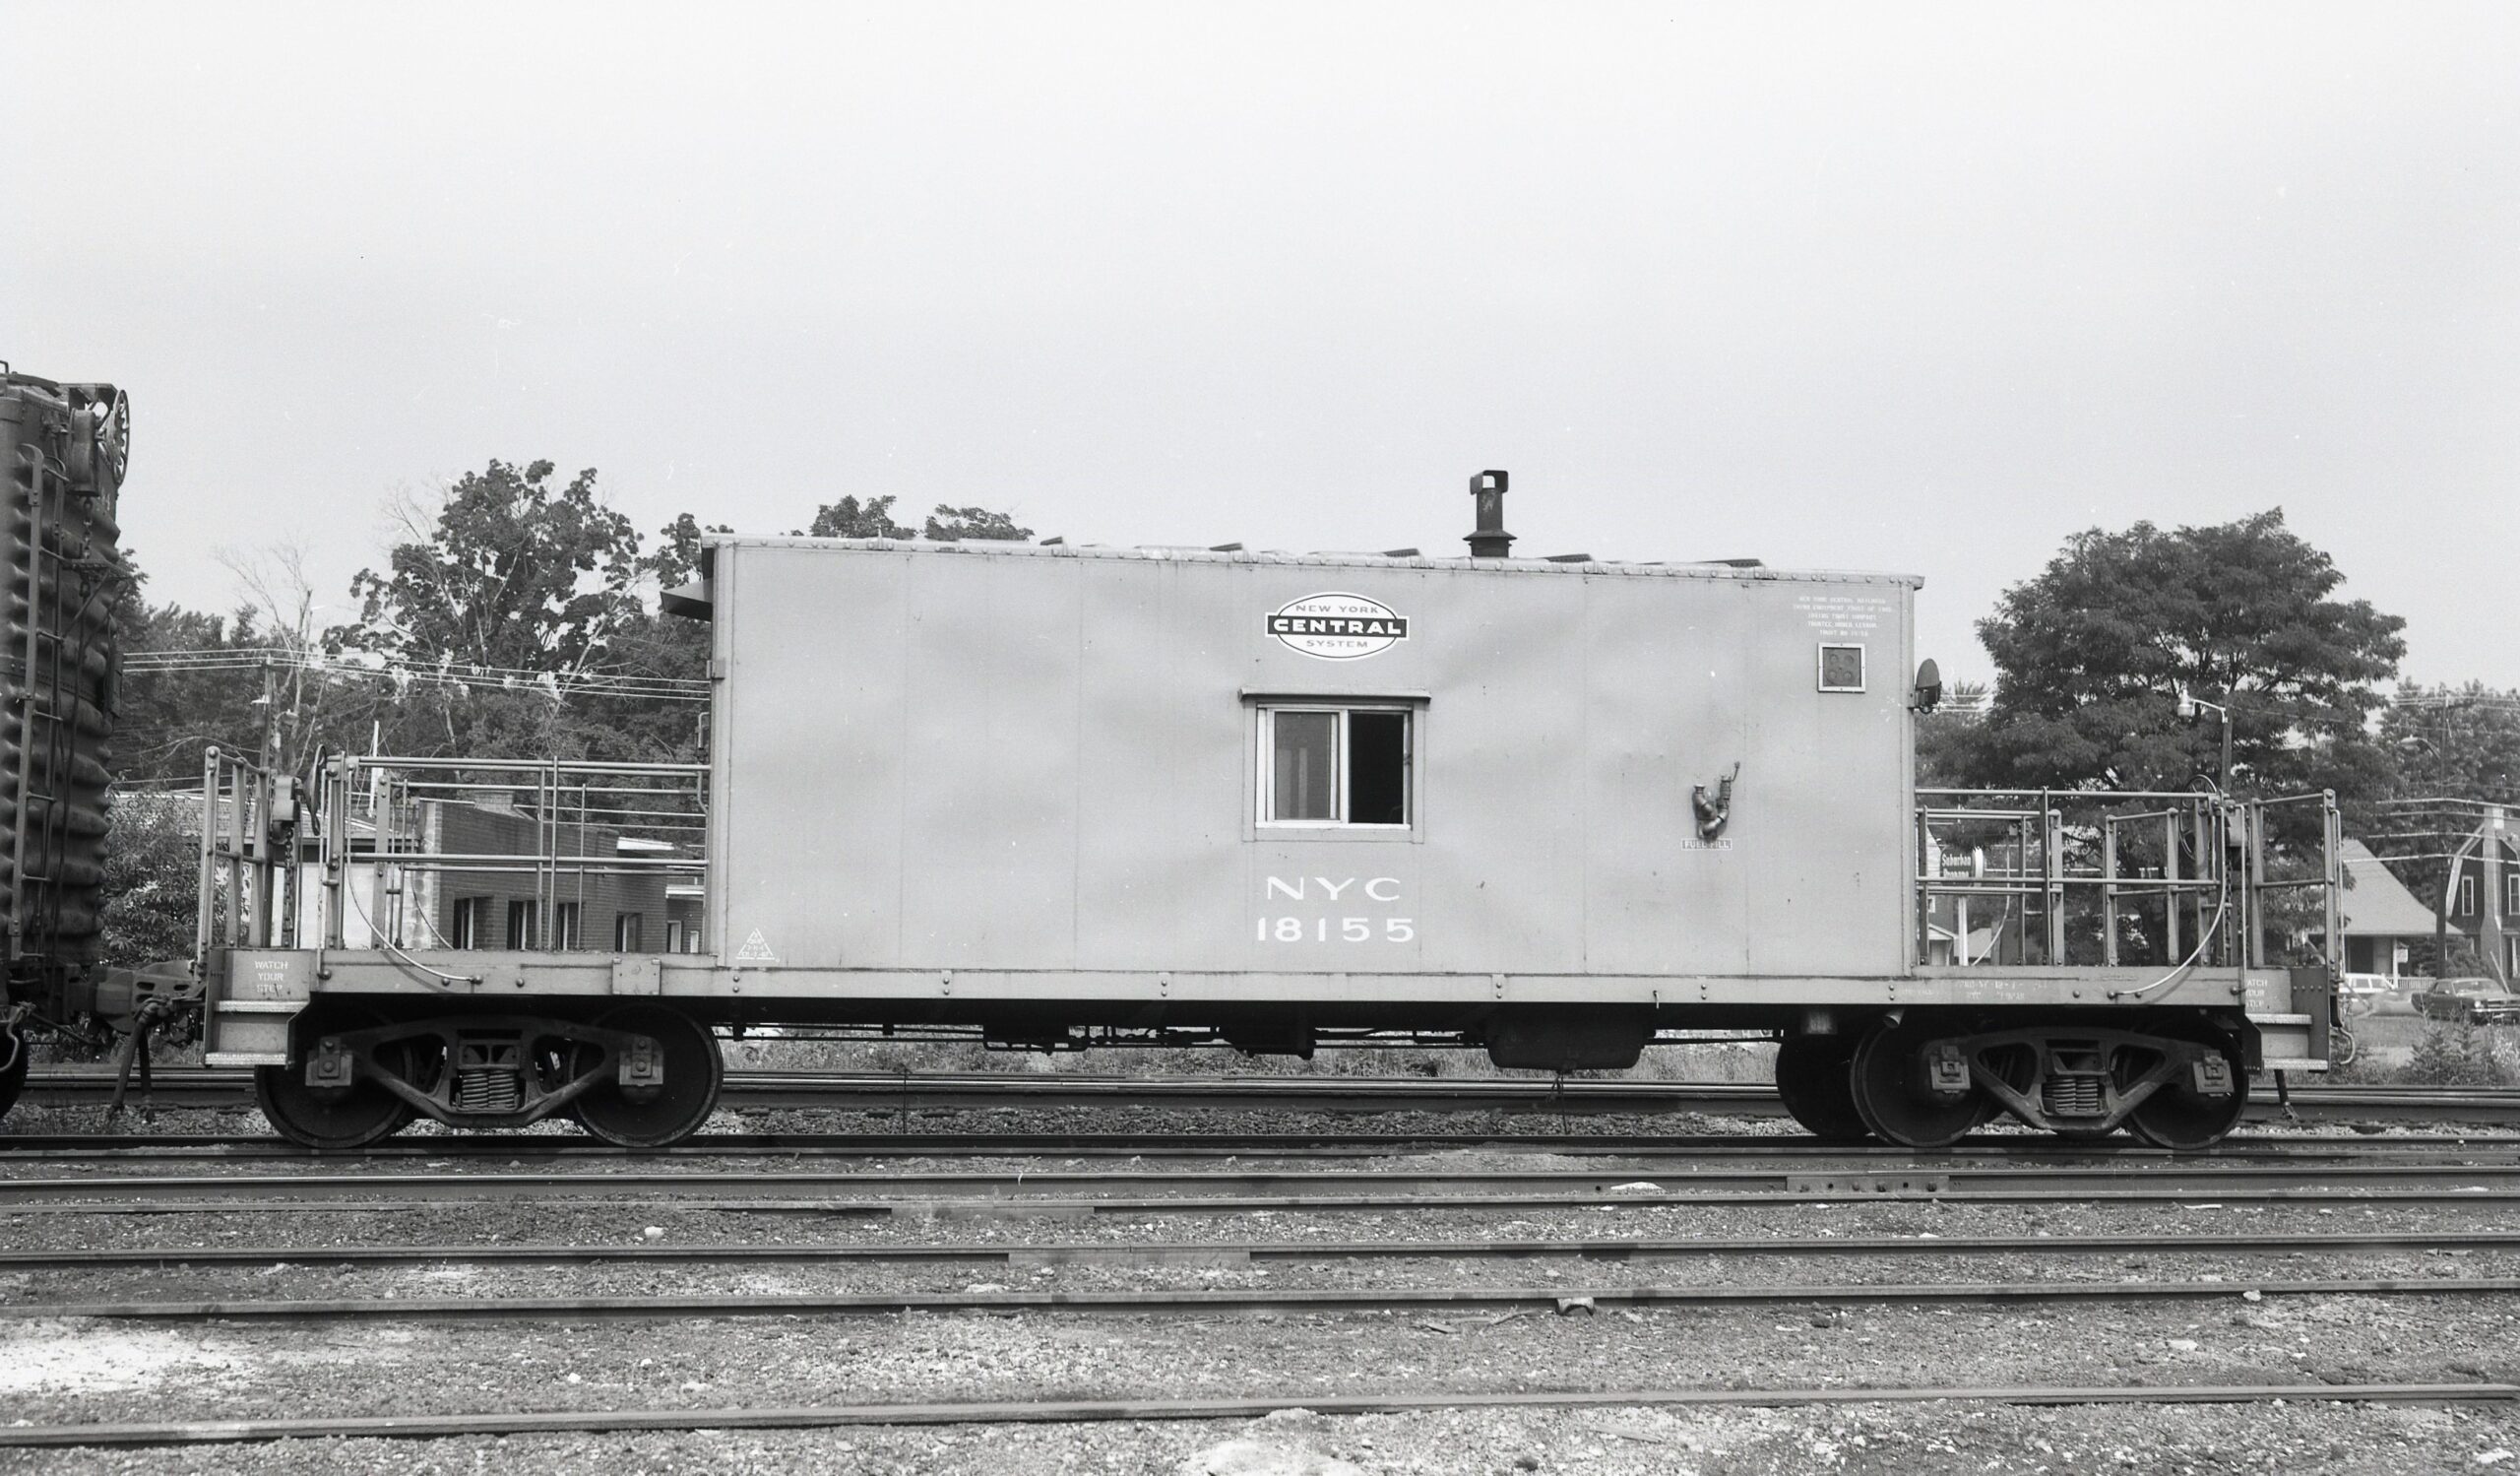 New York Central | Kingston, New York | Transfer Caboose # 18155 | August 1, 1968